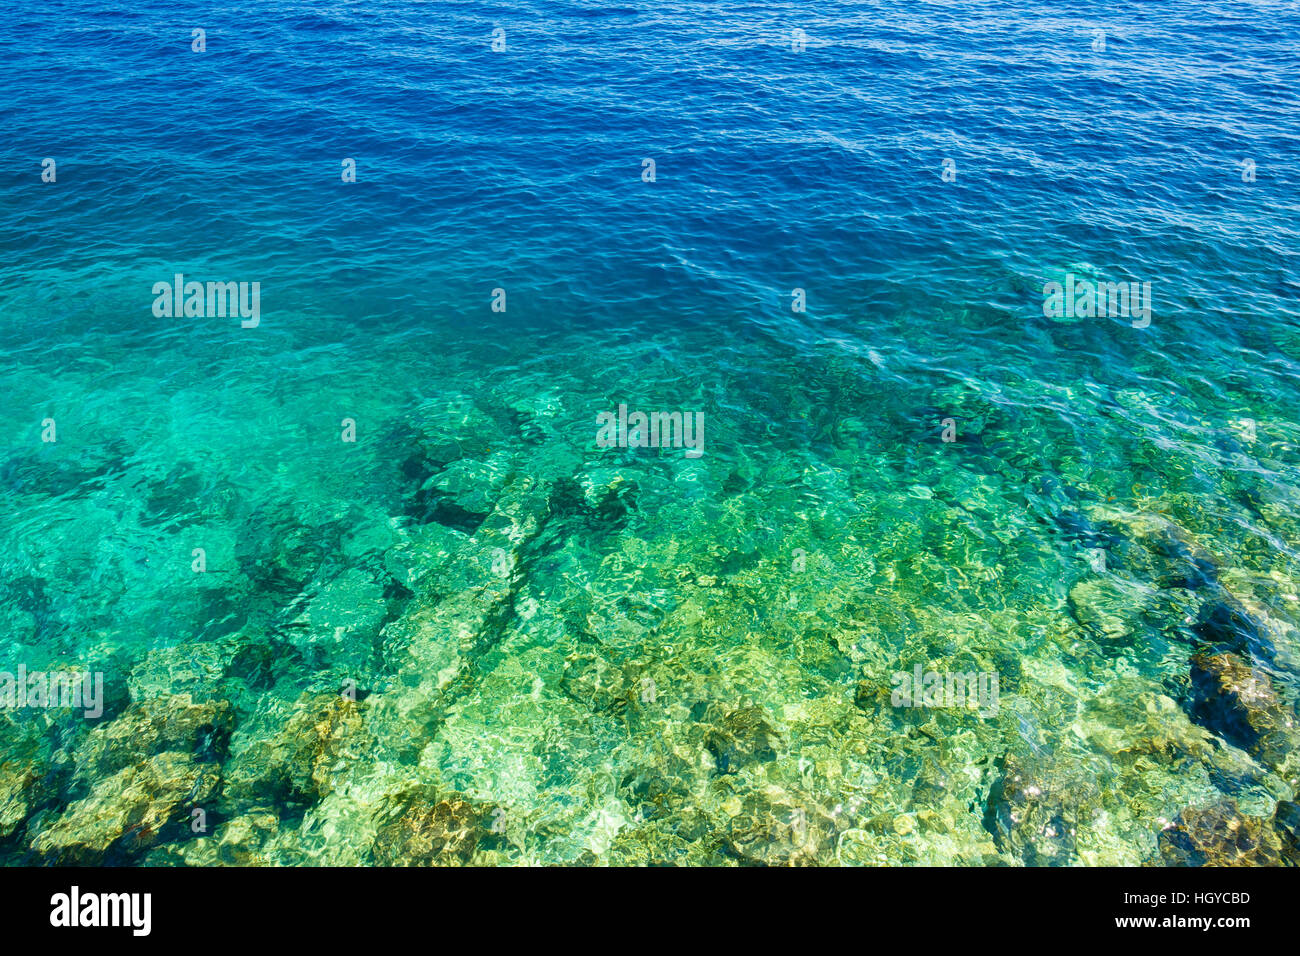 Sea Ocean Blue Water Clear Background. Stock Photo